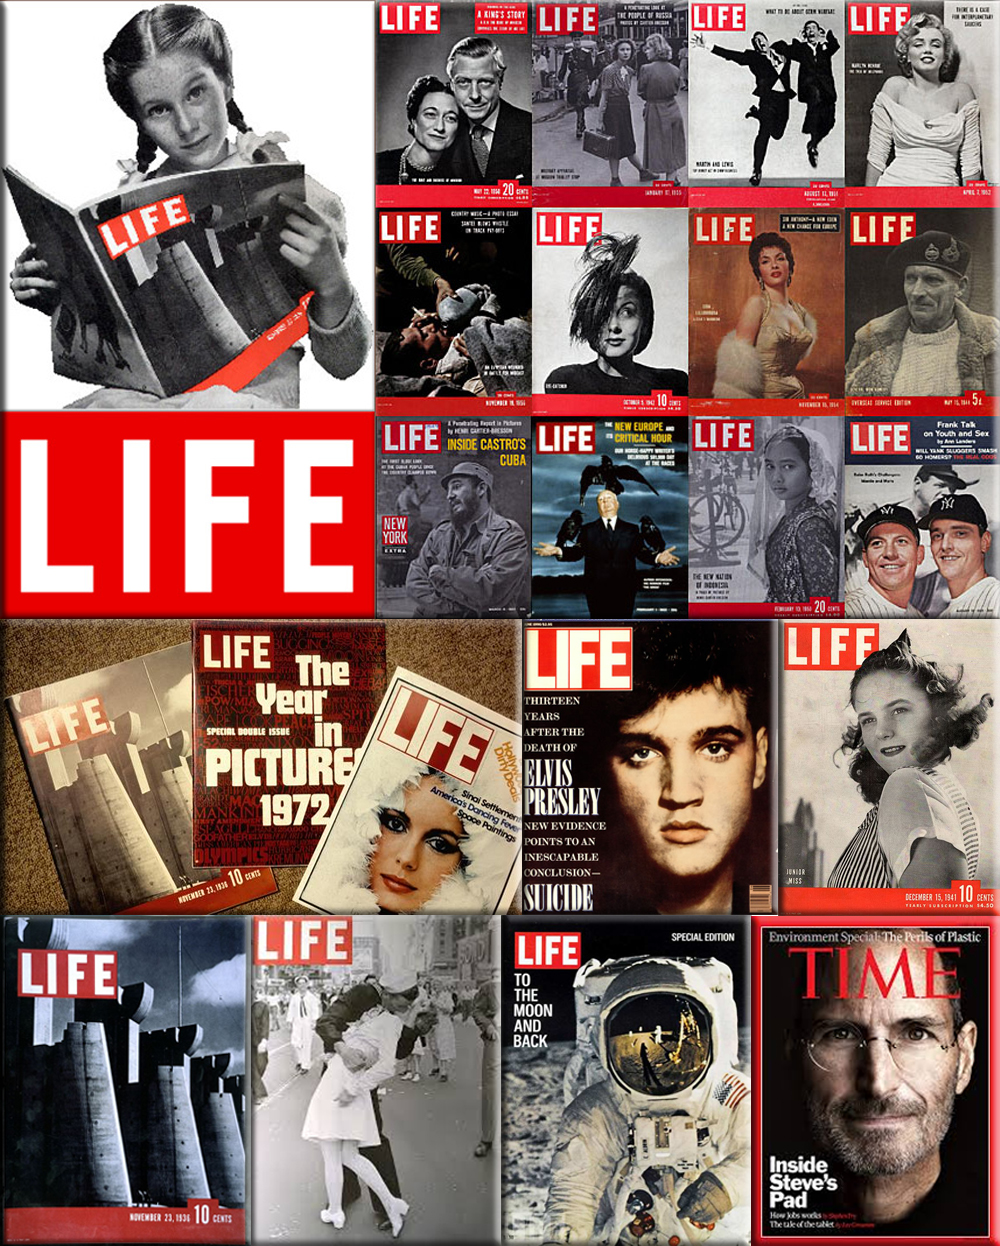 Life magazine is reborn as a photo magazine and enjoys instant success